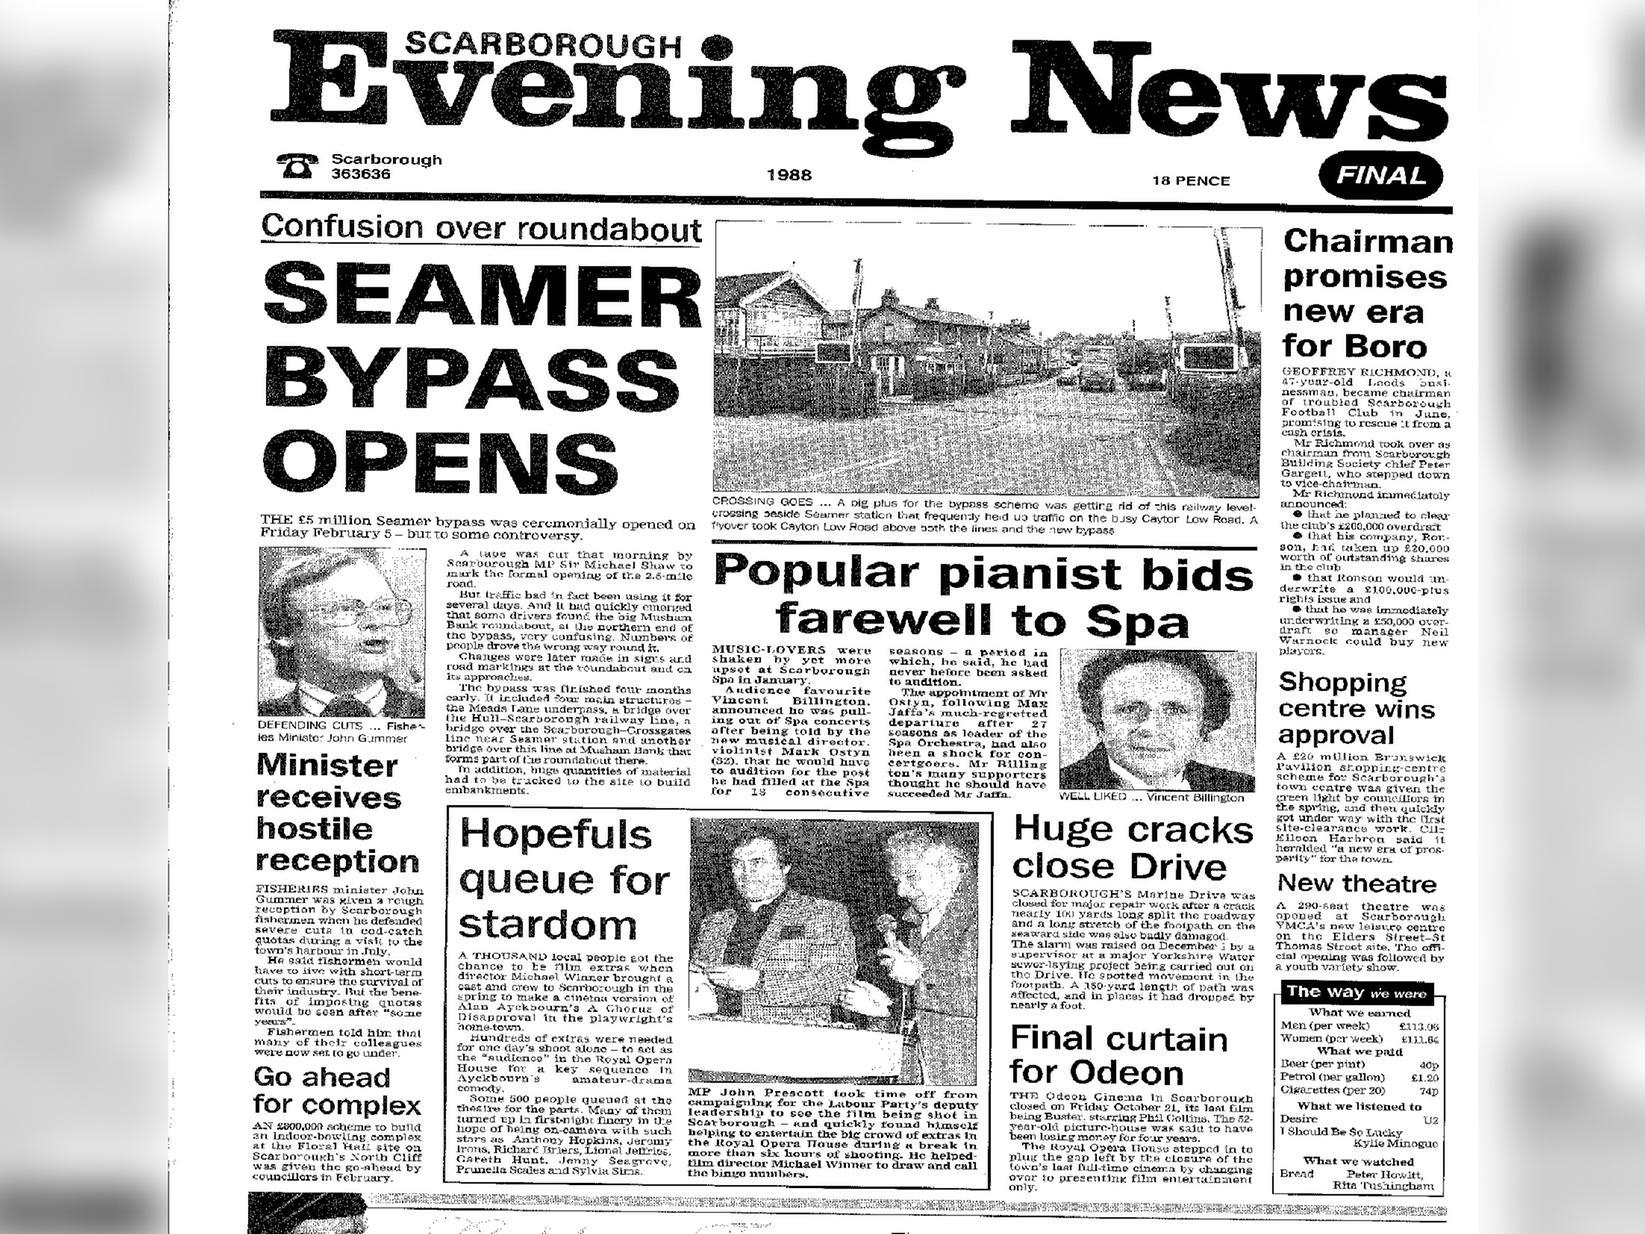 Seamer bypass was ceremonially opened by then MP Sir Michael Shaw, pianist Vincent Billington pulled out of Spa concerts and Geoffrey Richmond became Boro's new chairman.